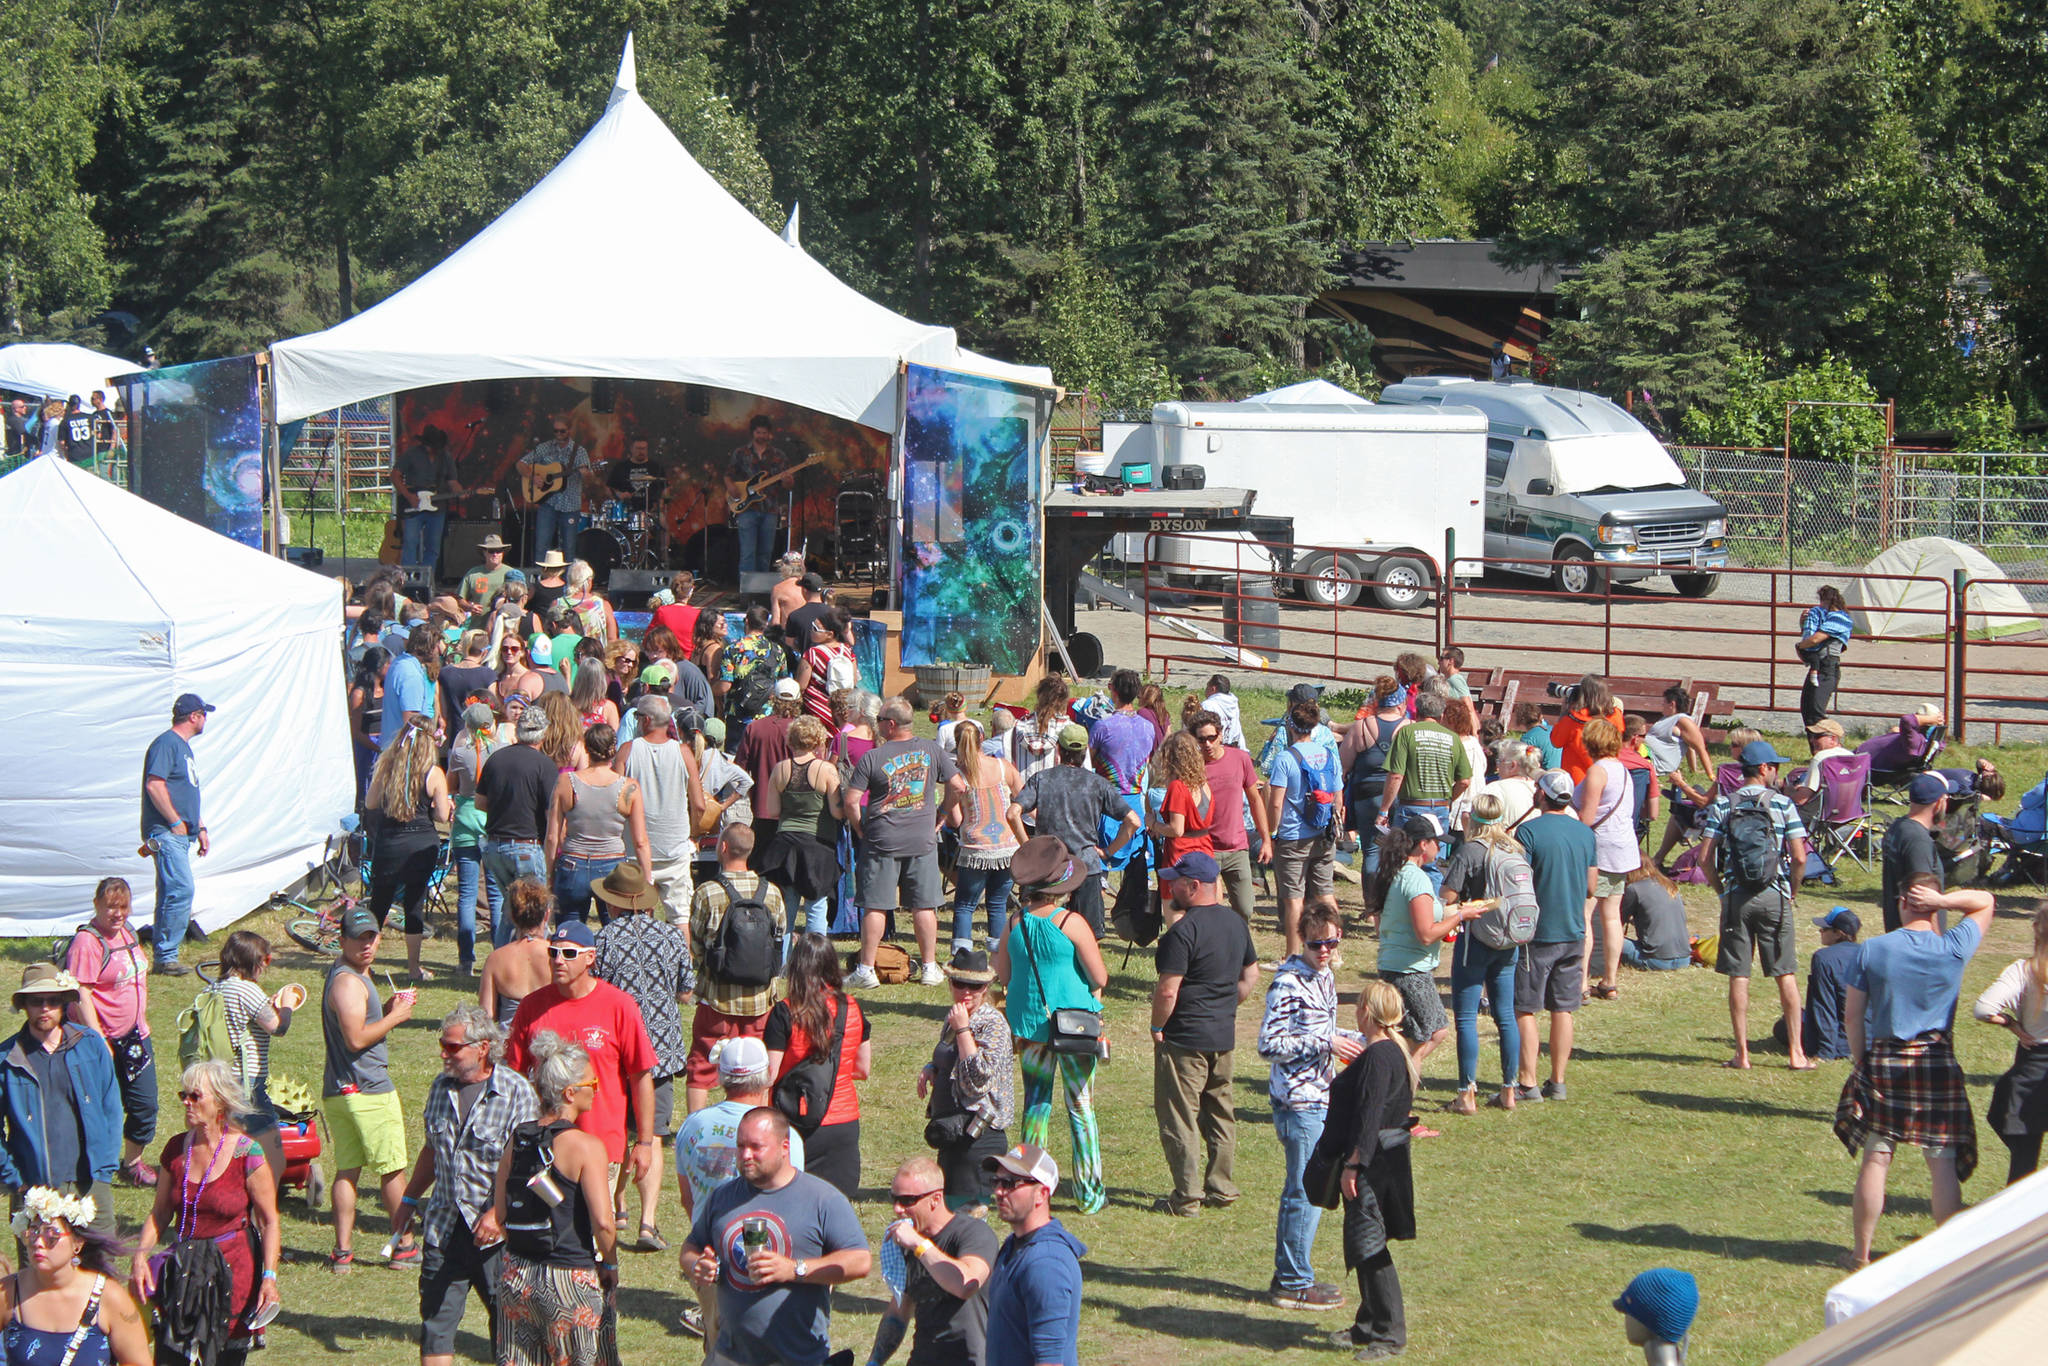 Festival goers listen to a performance at the River Stage on Saturday, Aug. 3, 2019 at Salmonfest in Ninilchik, Alaska. (Photo by Megan Pacer/Homer News)